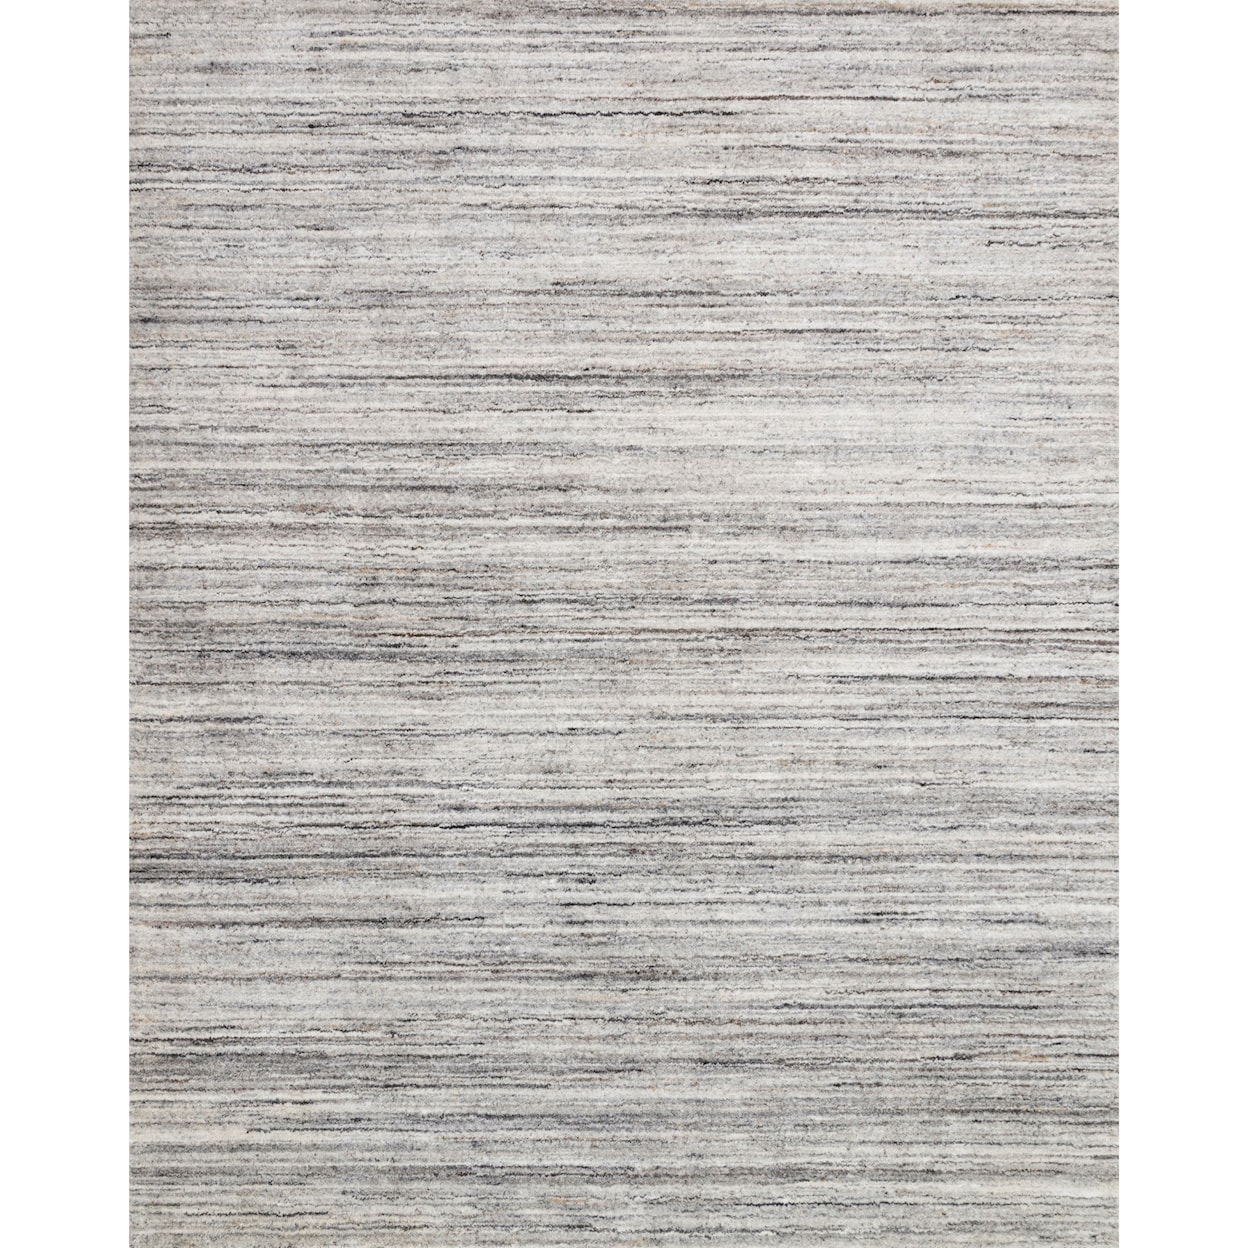 Reeds Rugs Brandt 11'6" x 15' Silver / Stone Rug